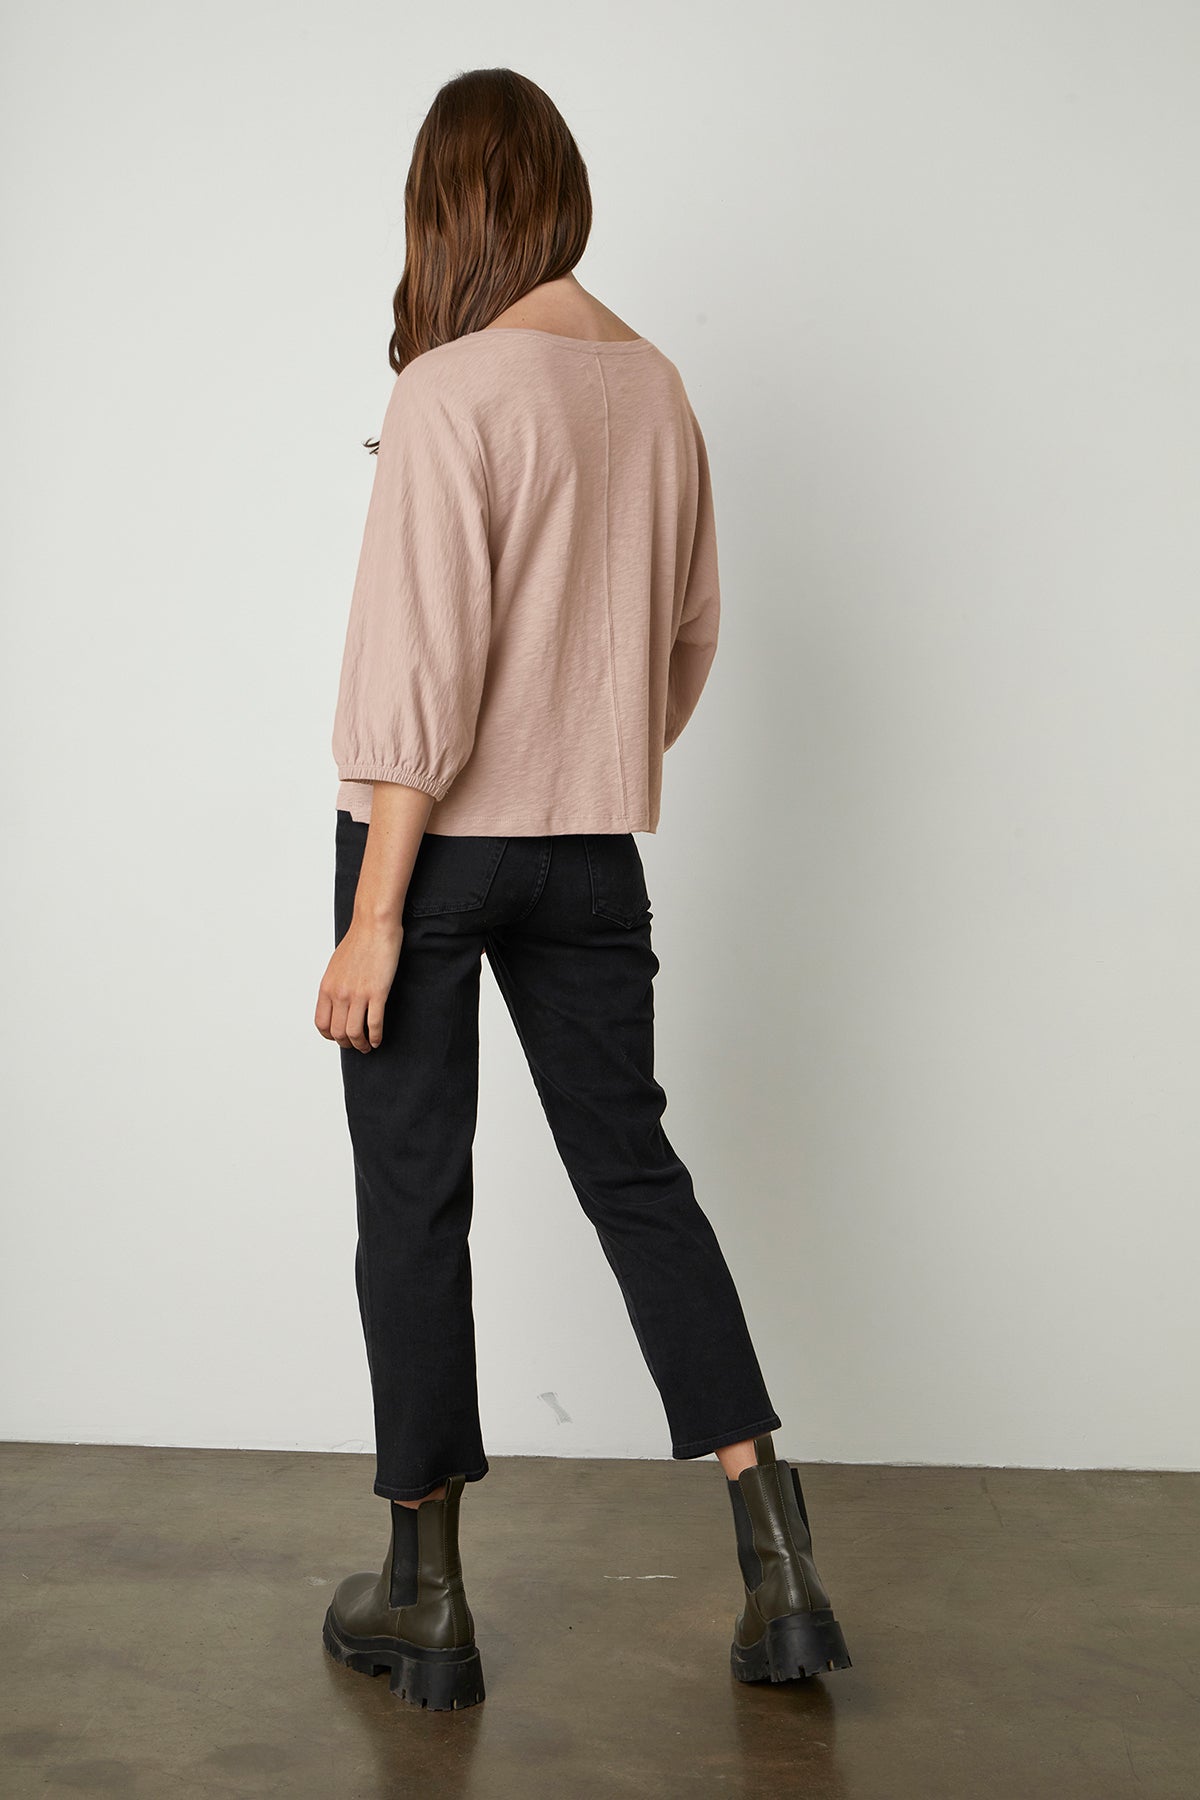 Corry Puff Sleeve Tee in rosegold with Victoria denim in noir black back-25807848341697